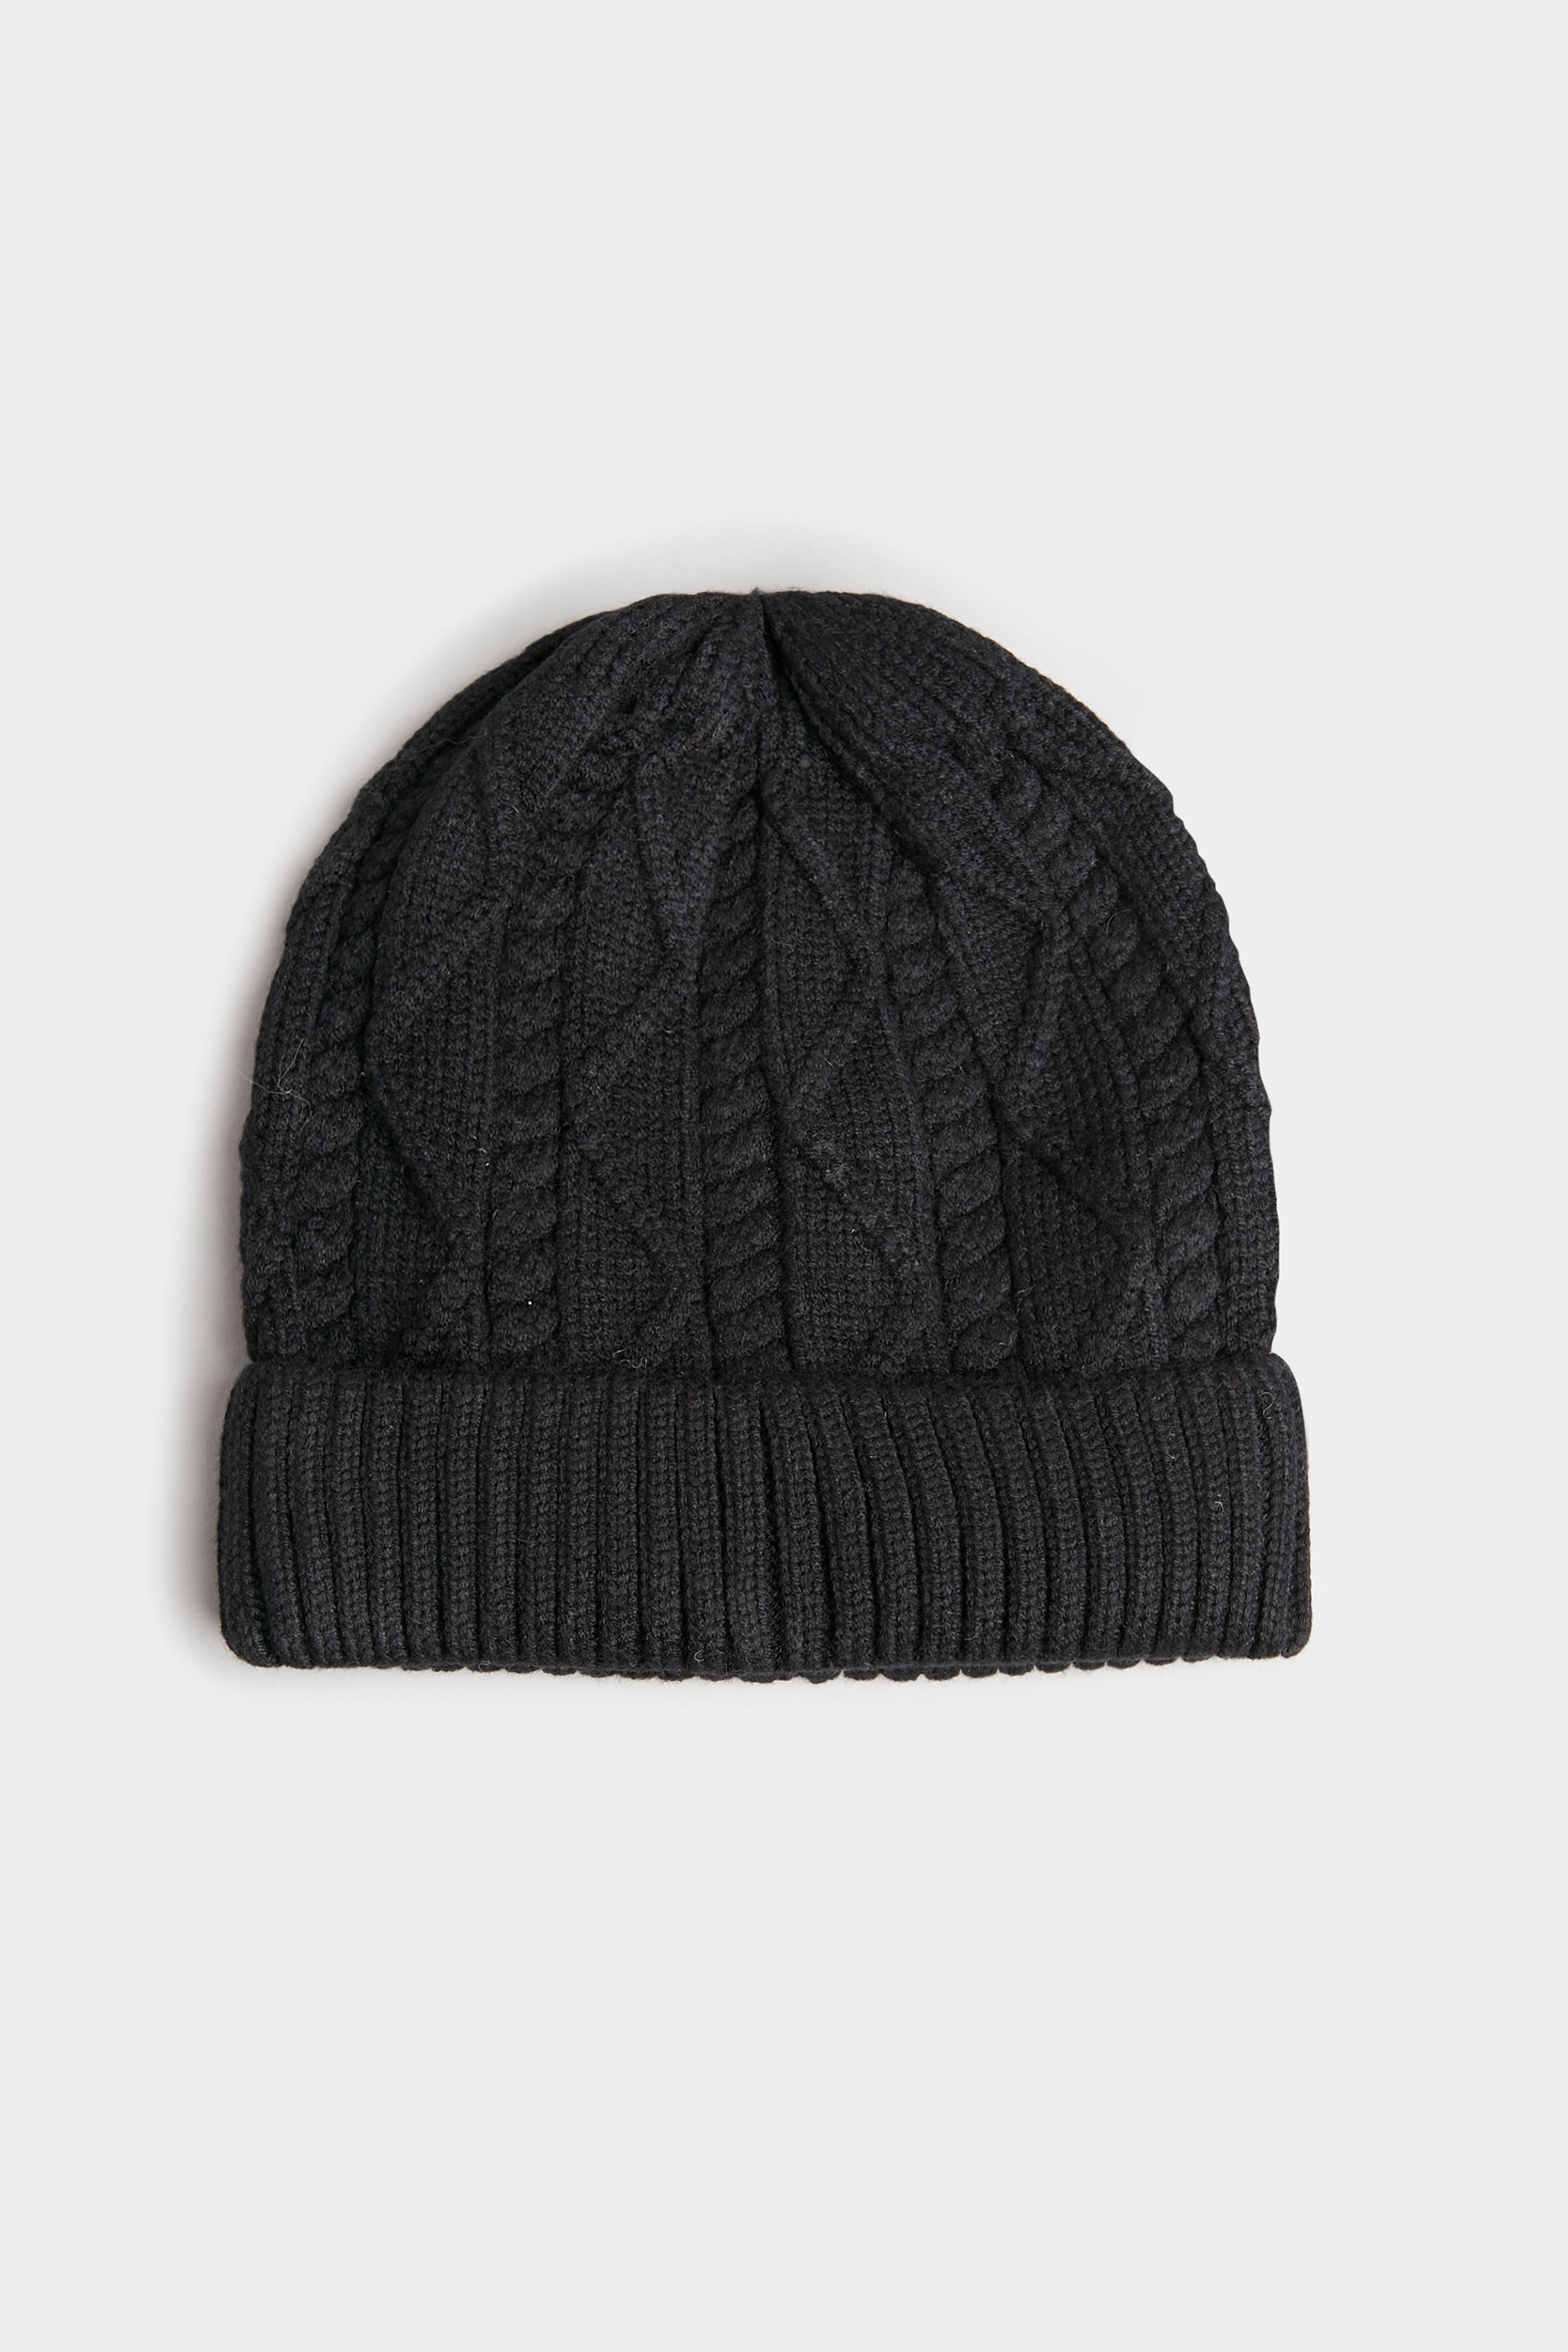 Black Cable Knitted Beanie Hat_A.jpg